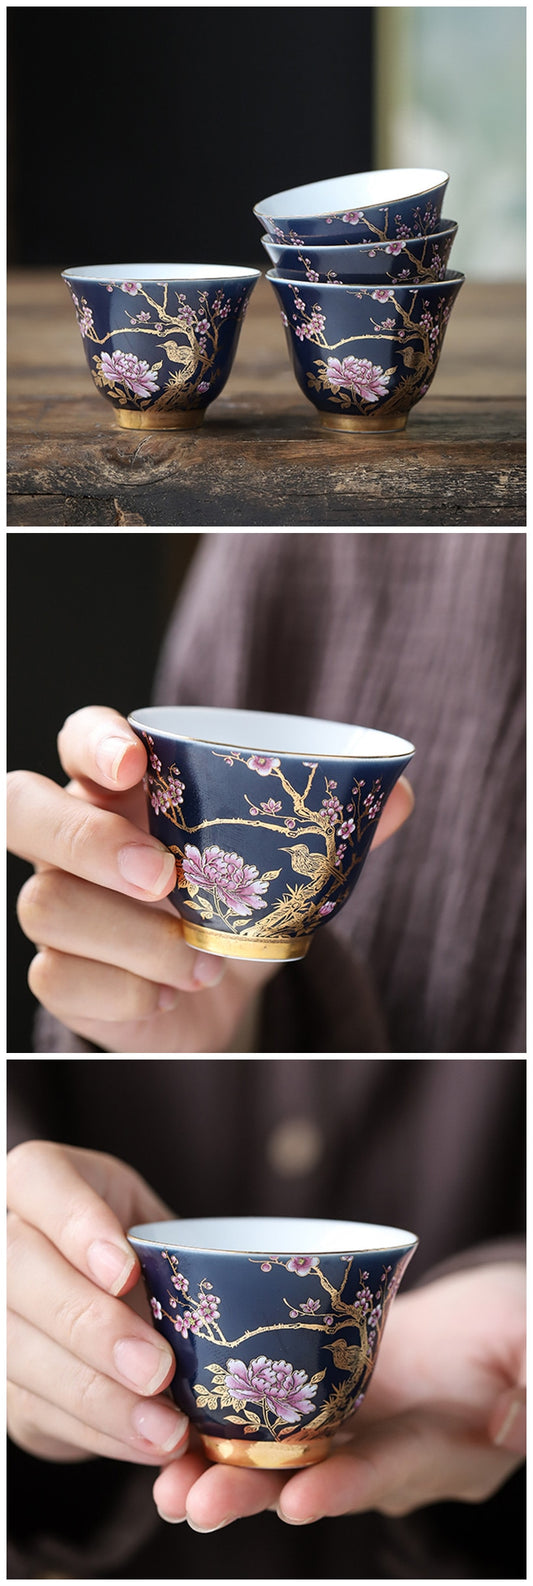 Luxury Ceramic Teacup Hand Painted with Flowers 65ml